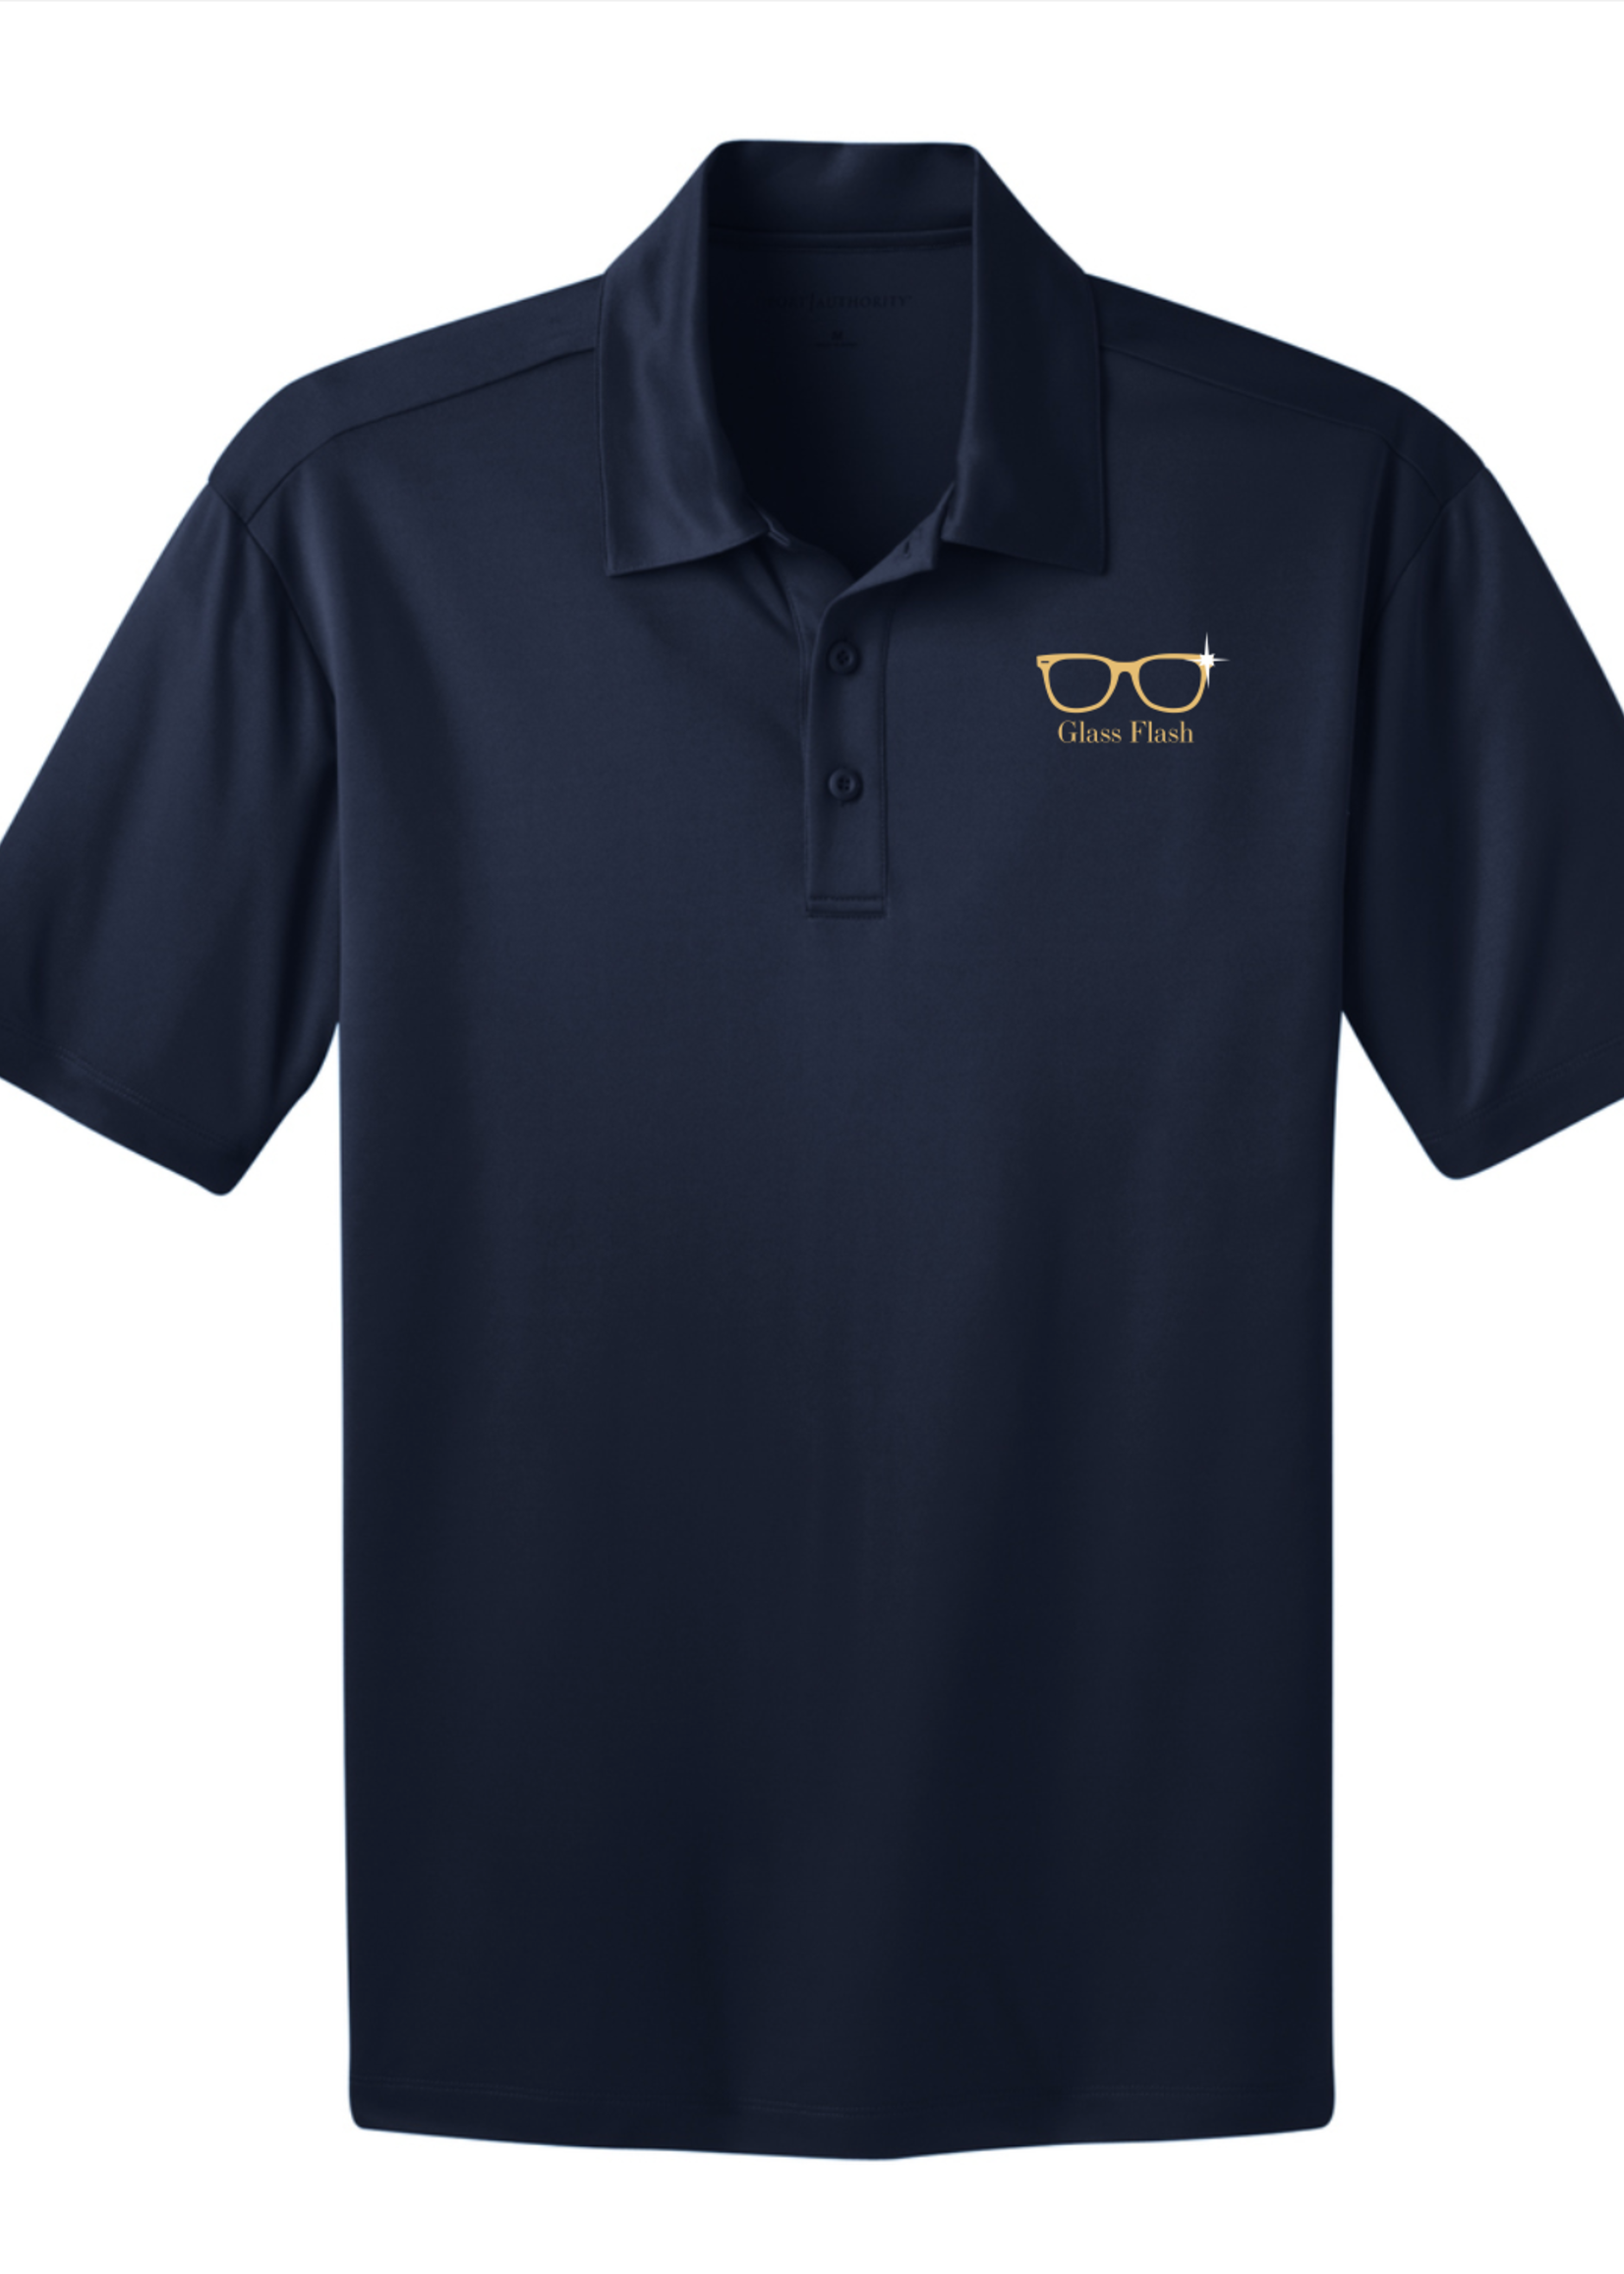 K540 Silk Touch Performance Polo - MBA Company